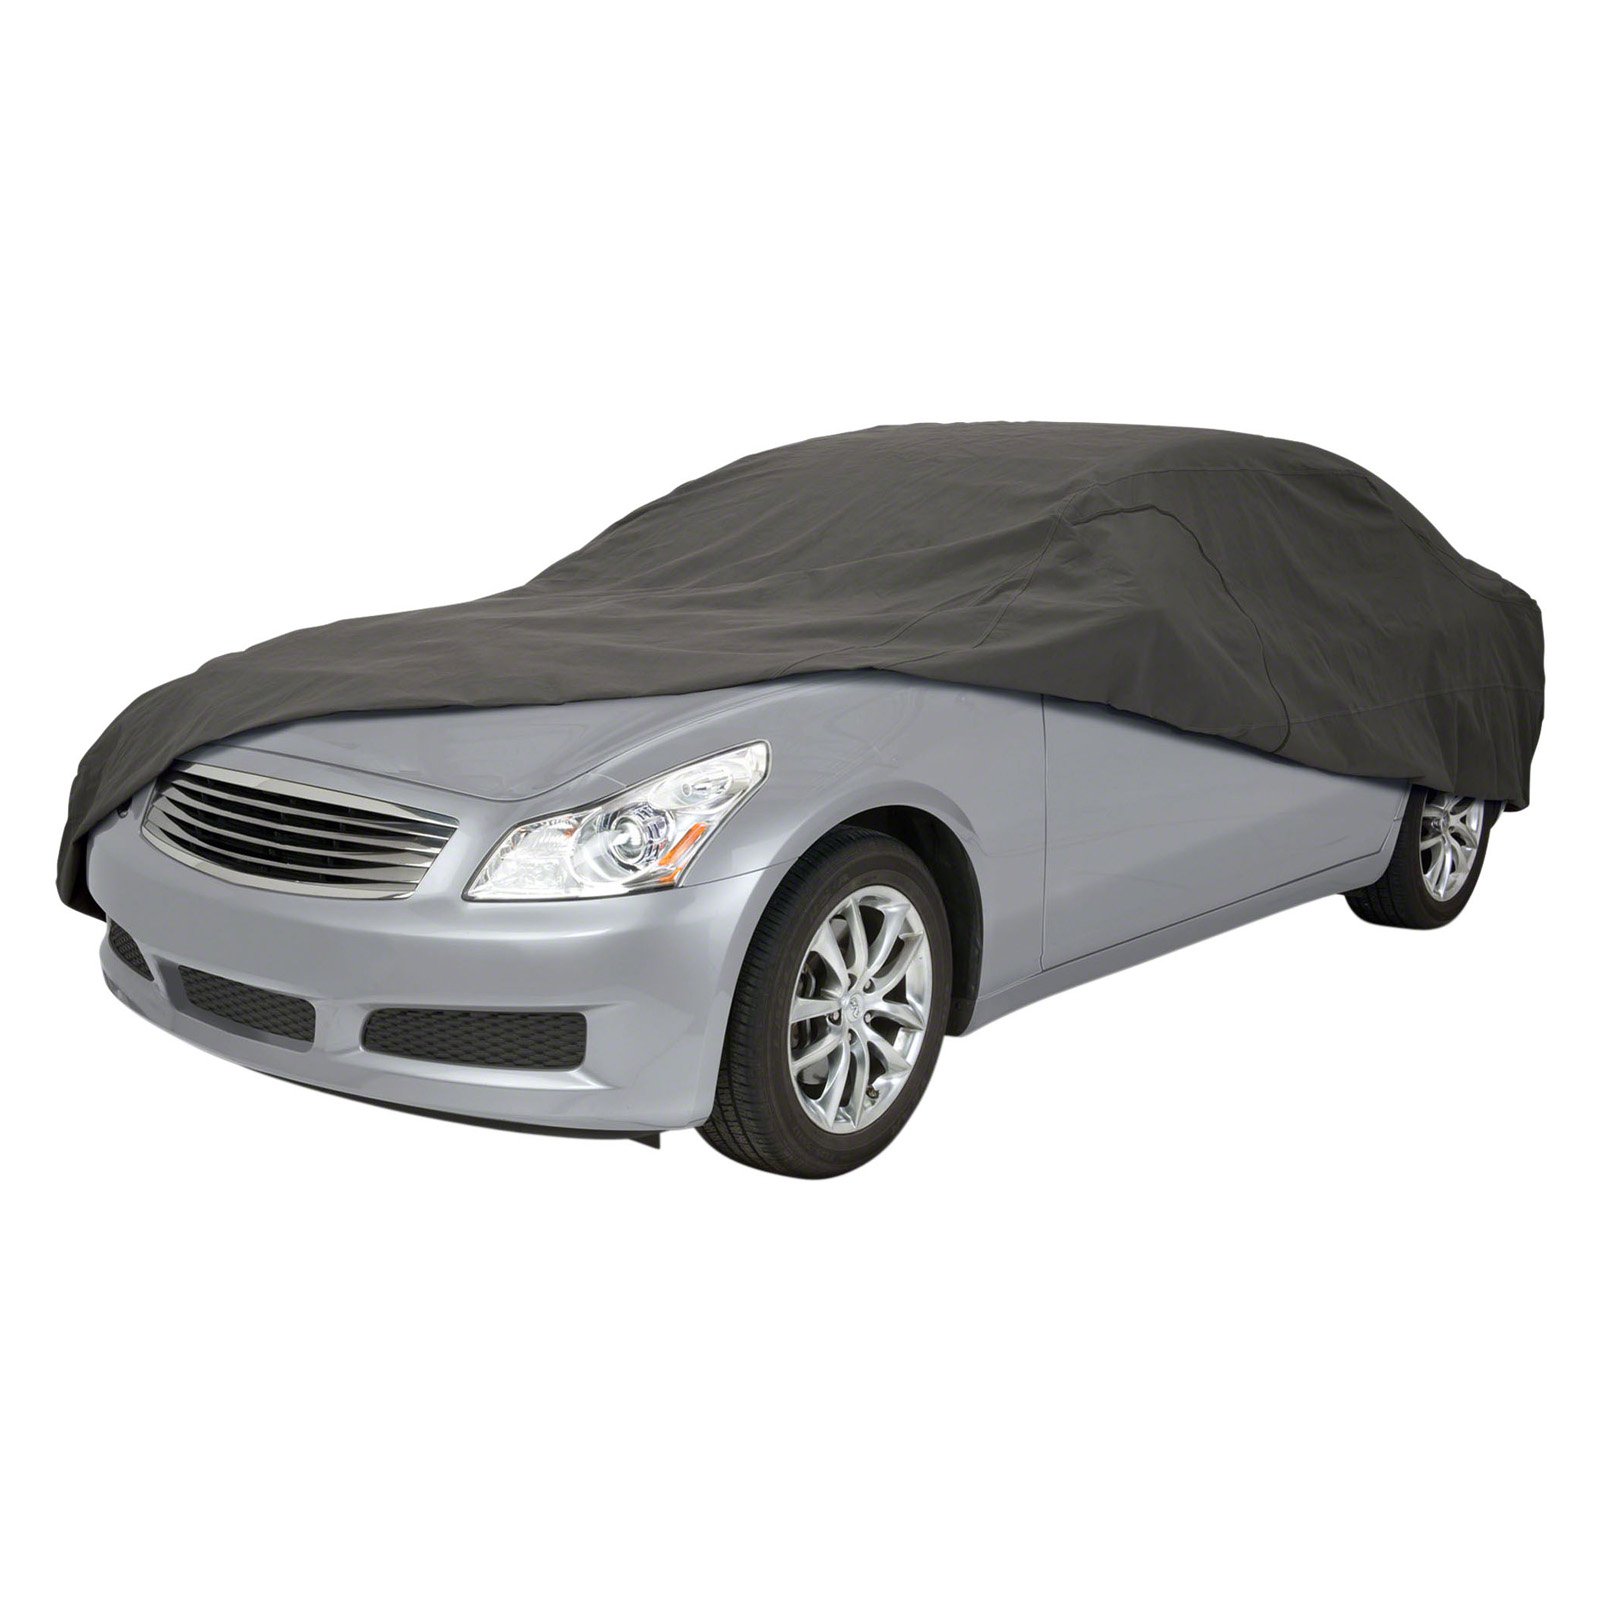 Classic Accessories OverDrive PolyPRO™ 3 Heavy-Duty Mid-Size Sedan Car Cover, 176" - 190"L, Charcoal - image 1 of 6